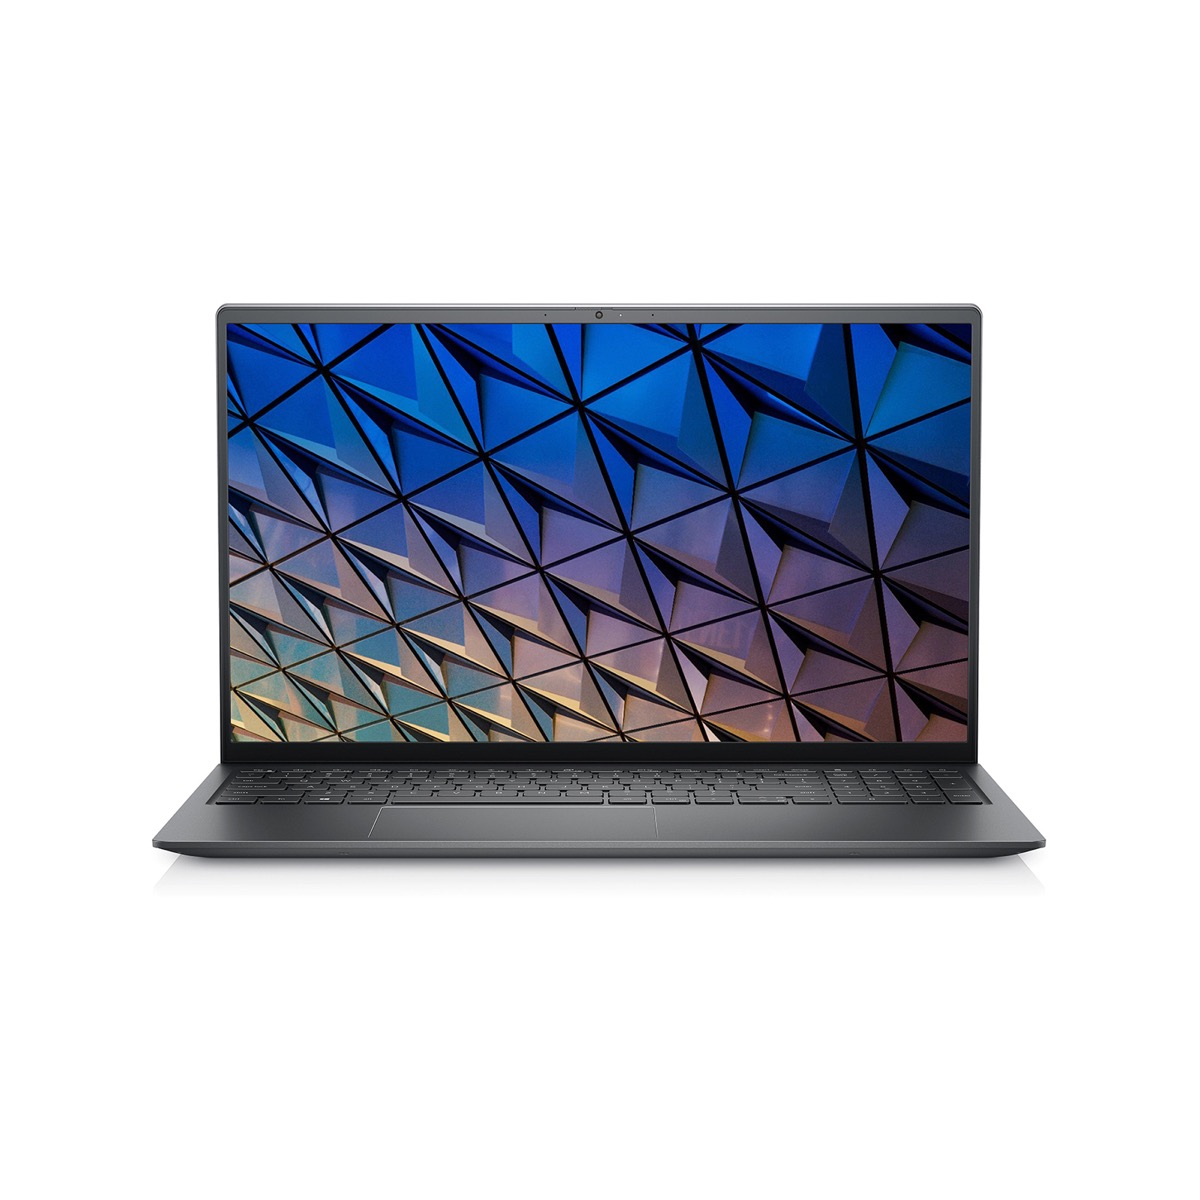 Dell-N7500VN5510EMEA01-Dell-N7500VN5510EMEA01-N7500VN5510EMEA01-Laptops | LaptopSA.co.za a division of the notebook company 